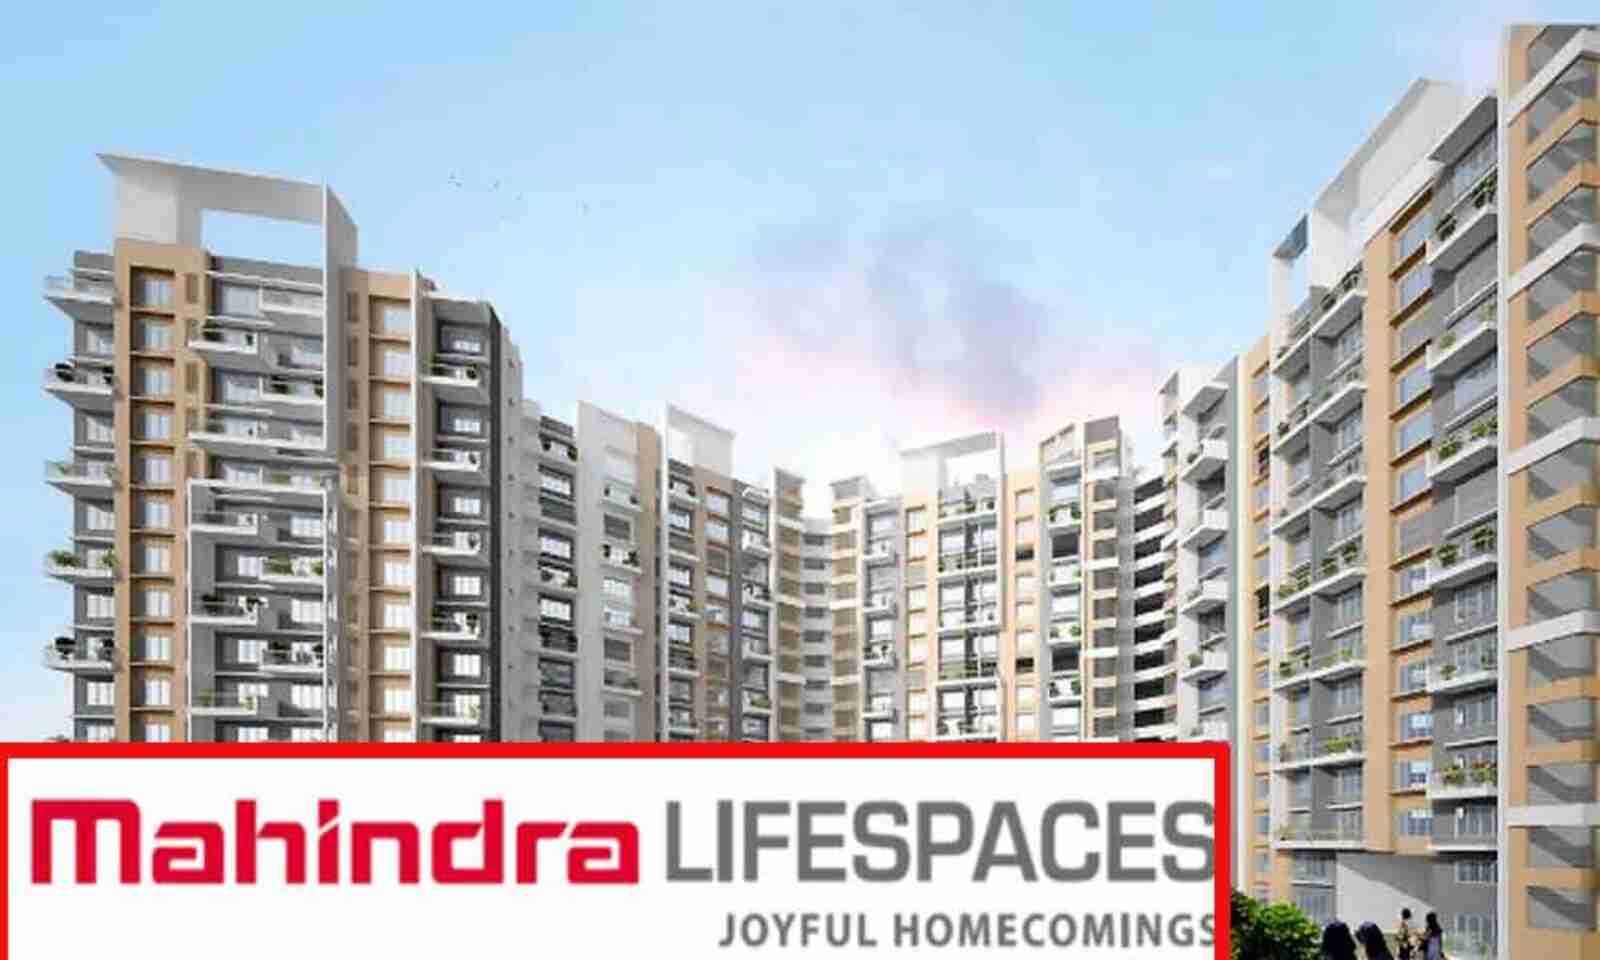 Mahindra Lifespace to build India's first net-zero housing project in Bengaluru at Rs 500cr cost - Jammu Kashmir Latest News | Tourism | Breaking News J&K